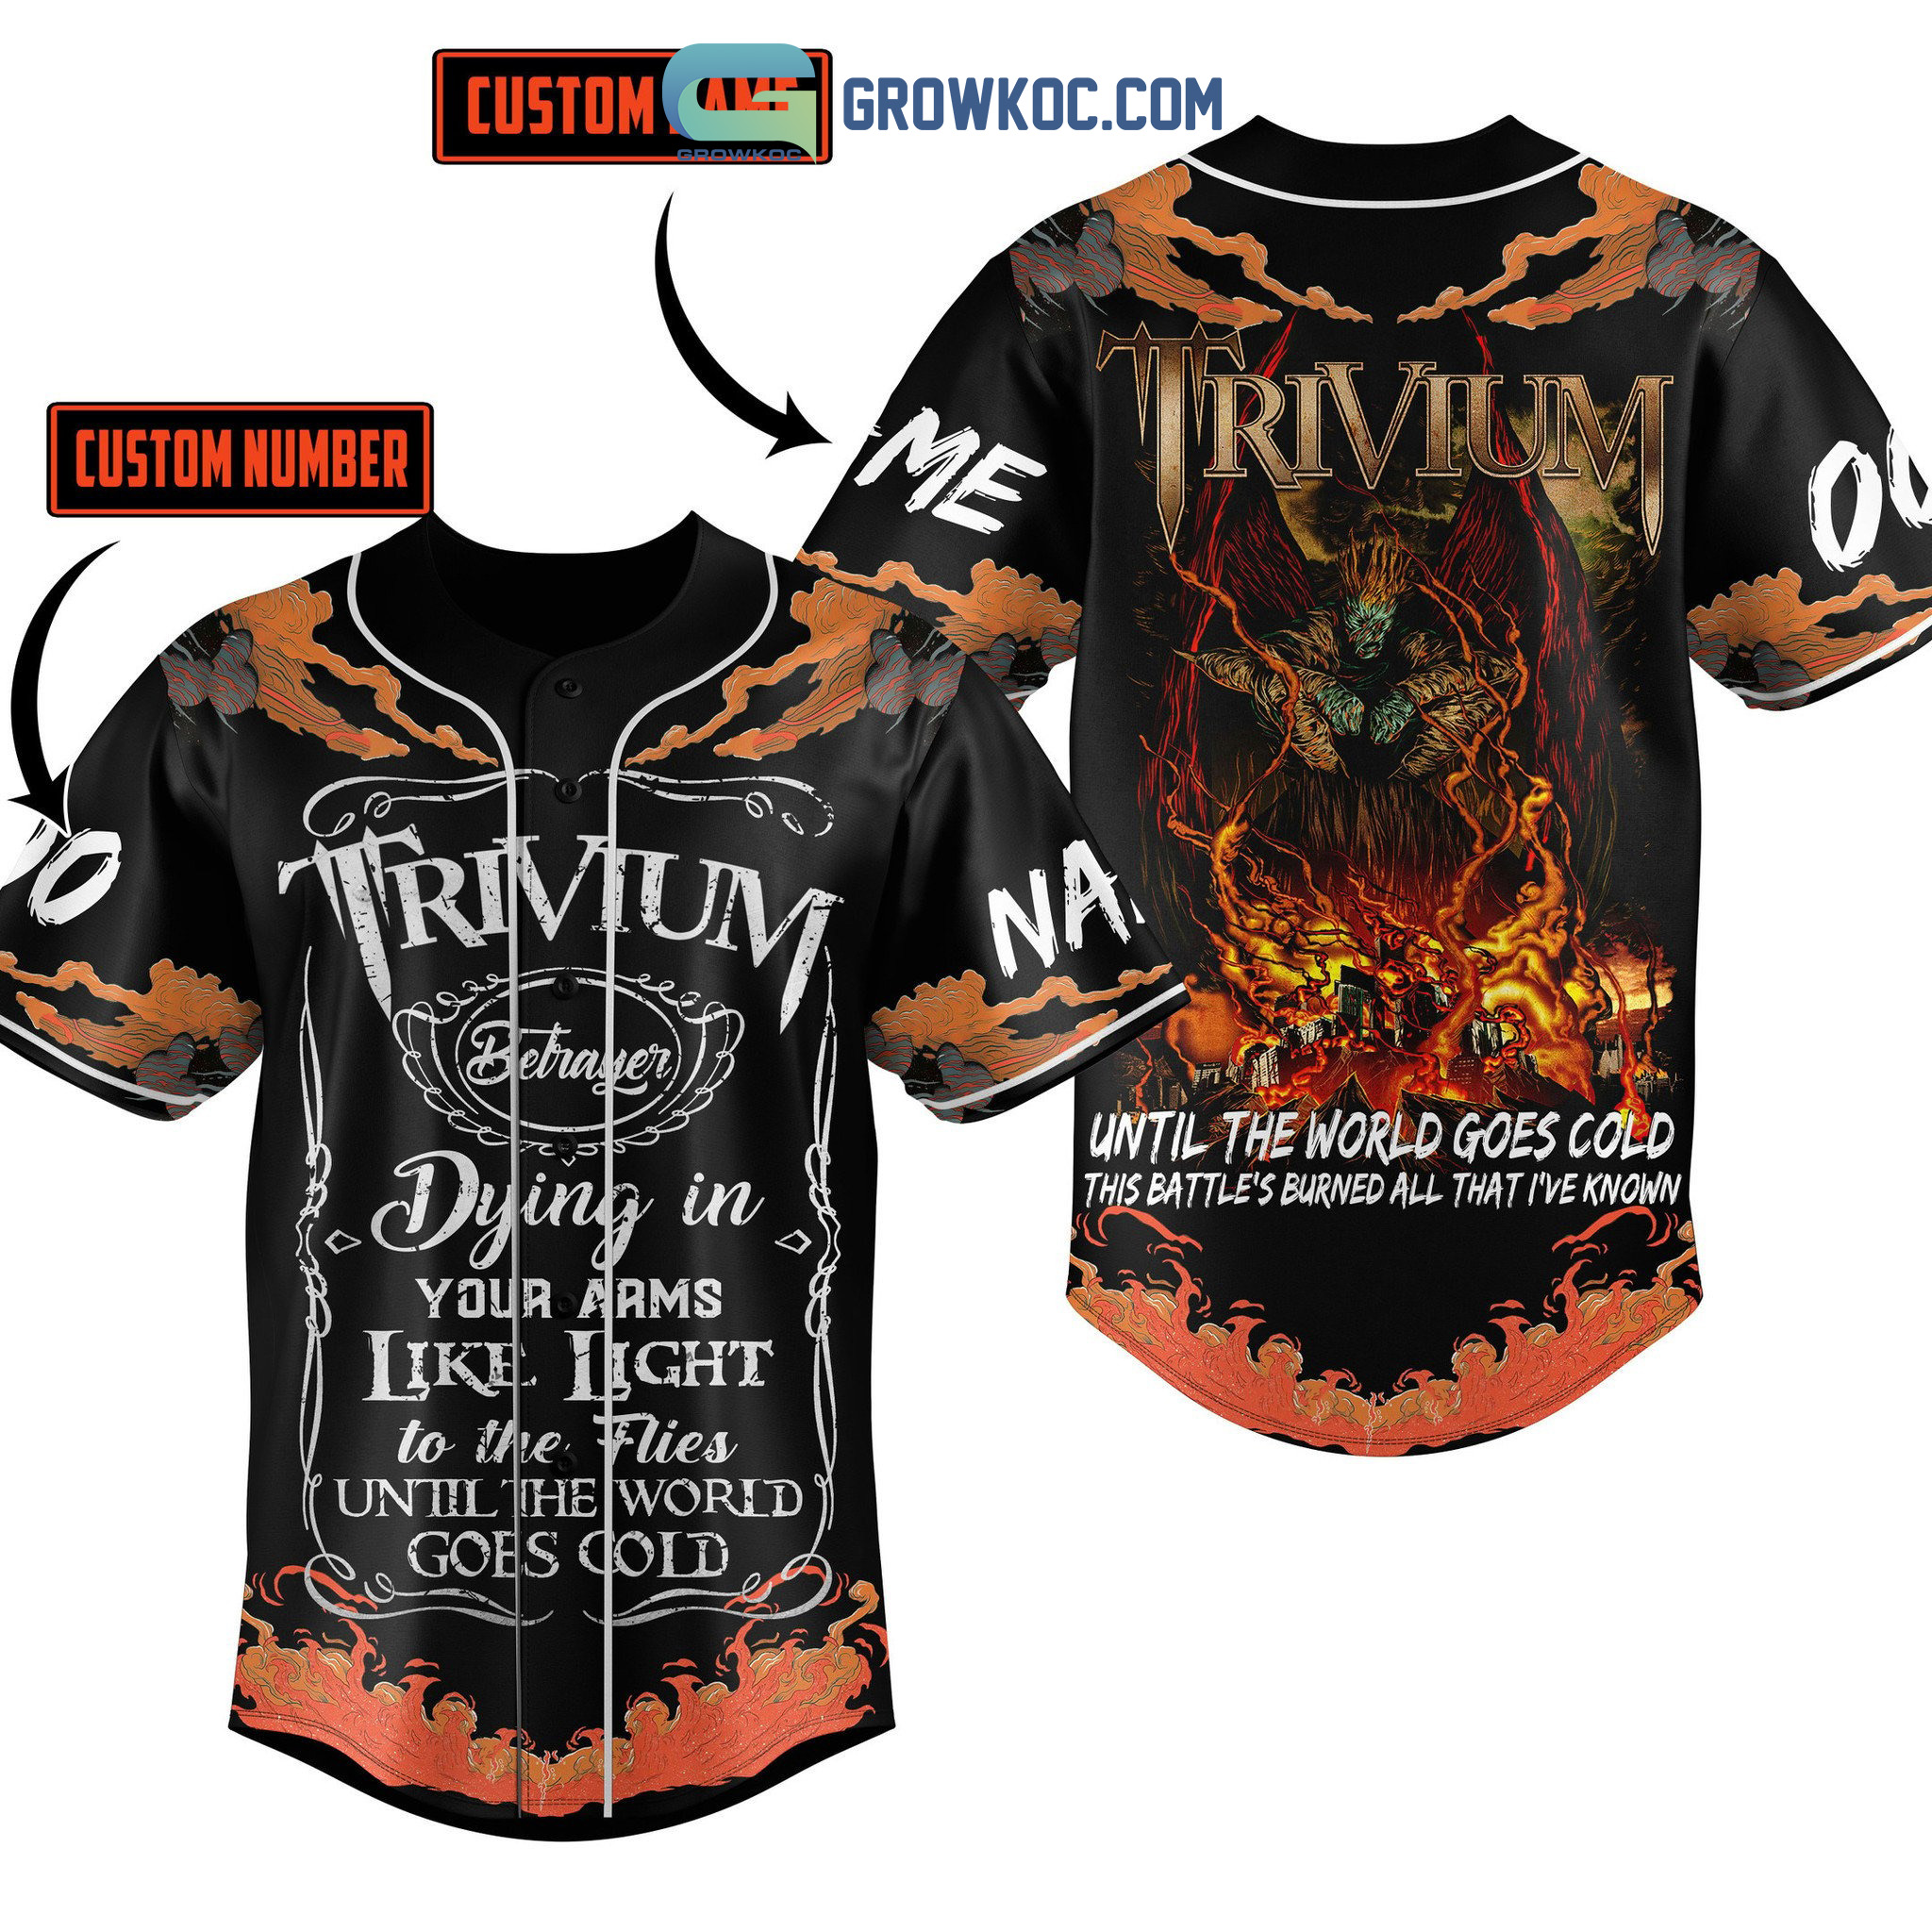 Trivium Until The World Goes Cold This Battle's Burned All That I